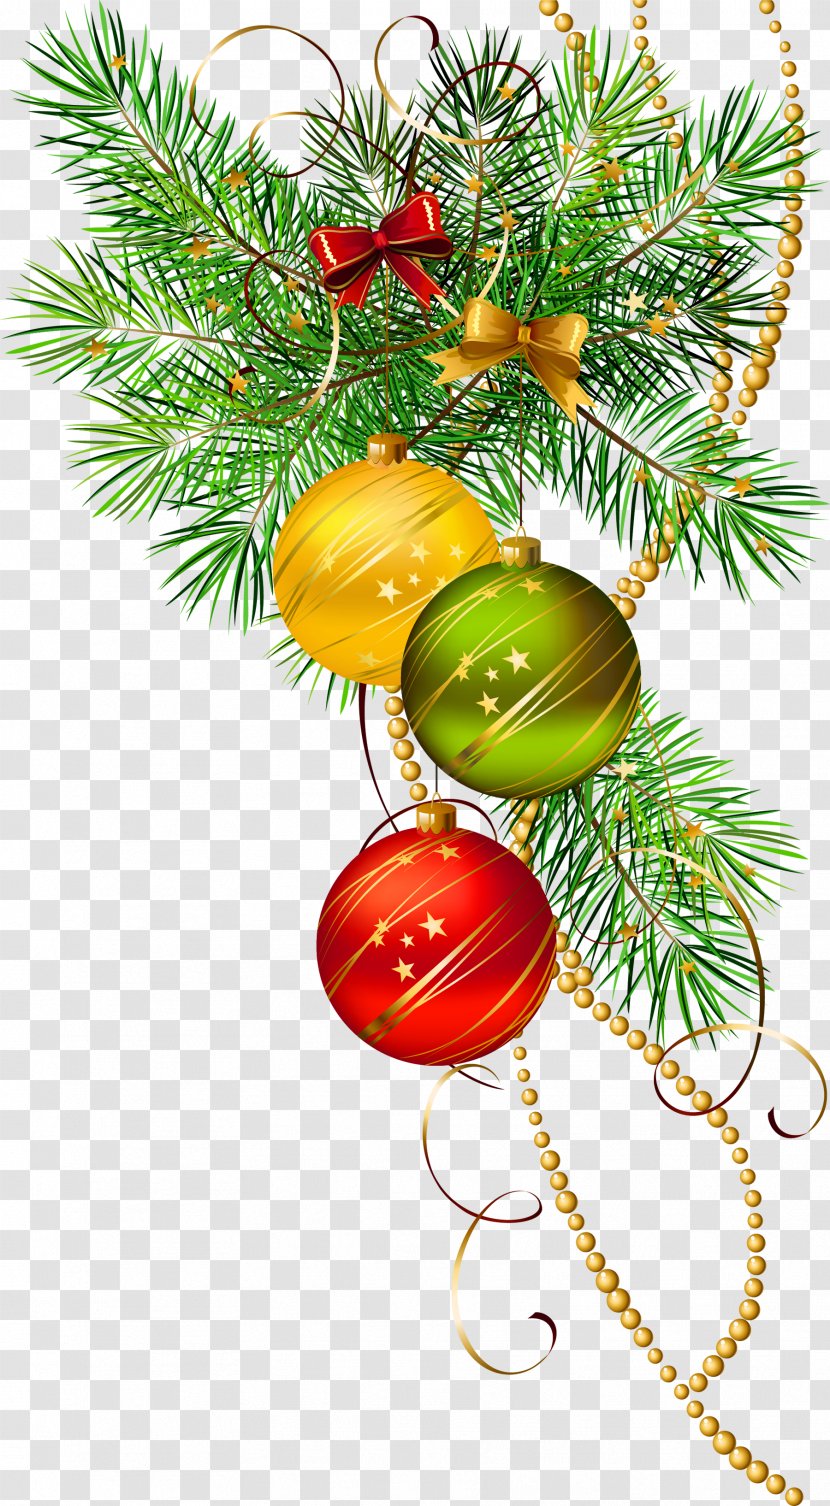 Christmas Ornament Icon Clip Art - Tree - Three Balls With Pine Branch Clipart Transparent PNG